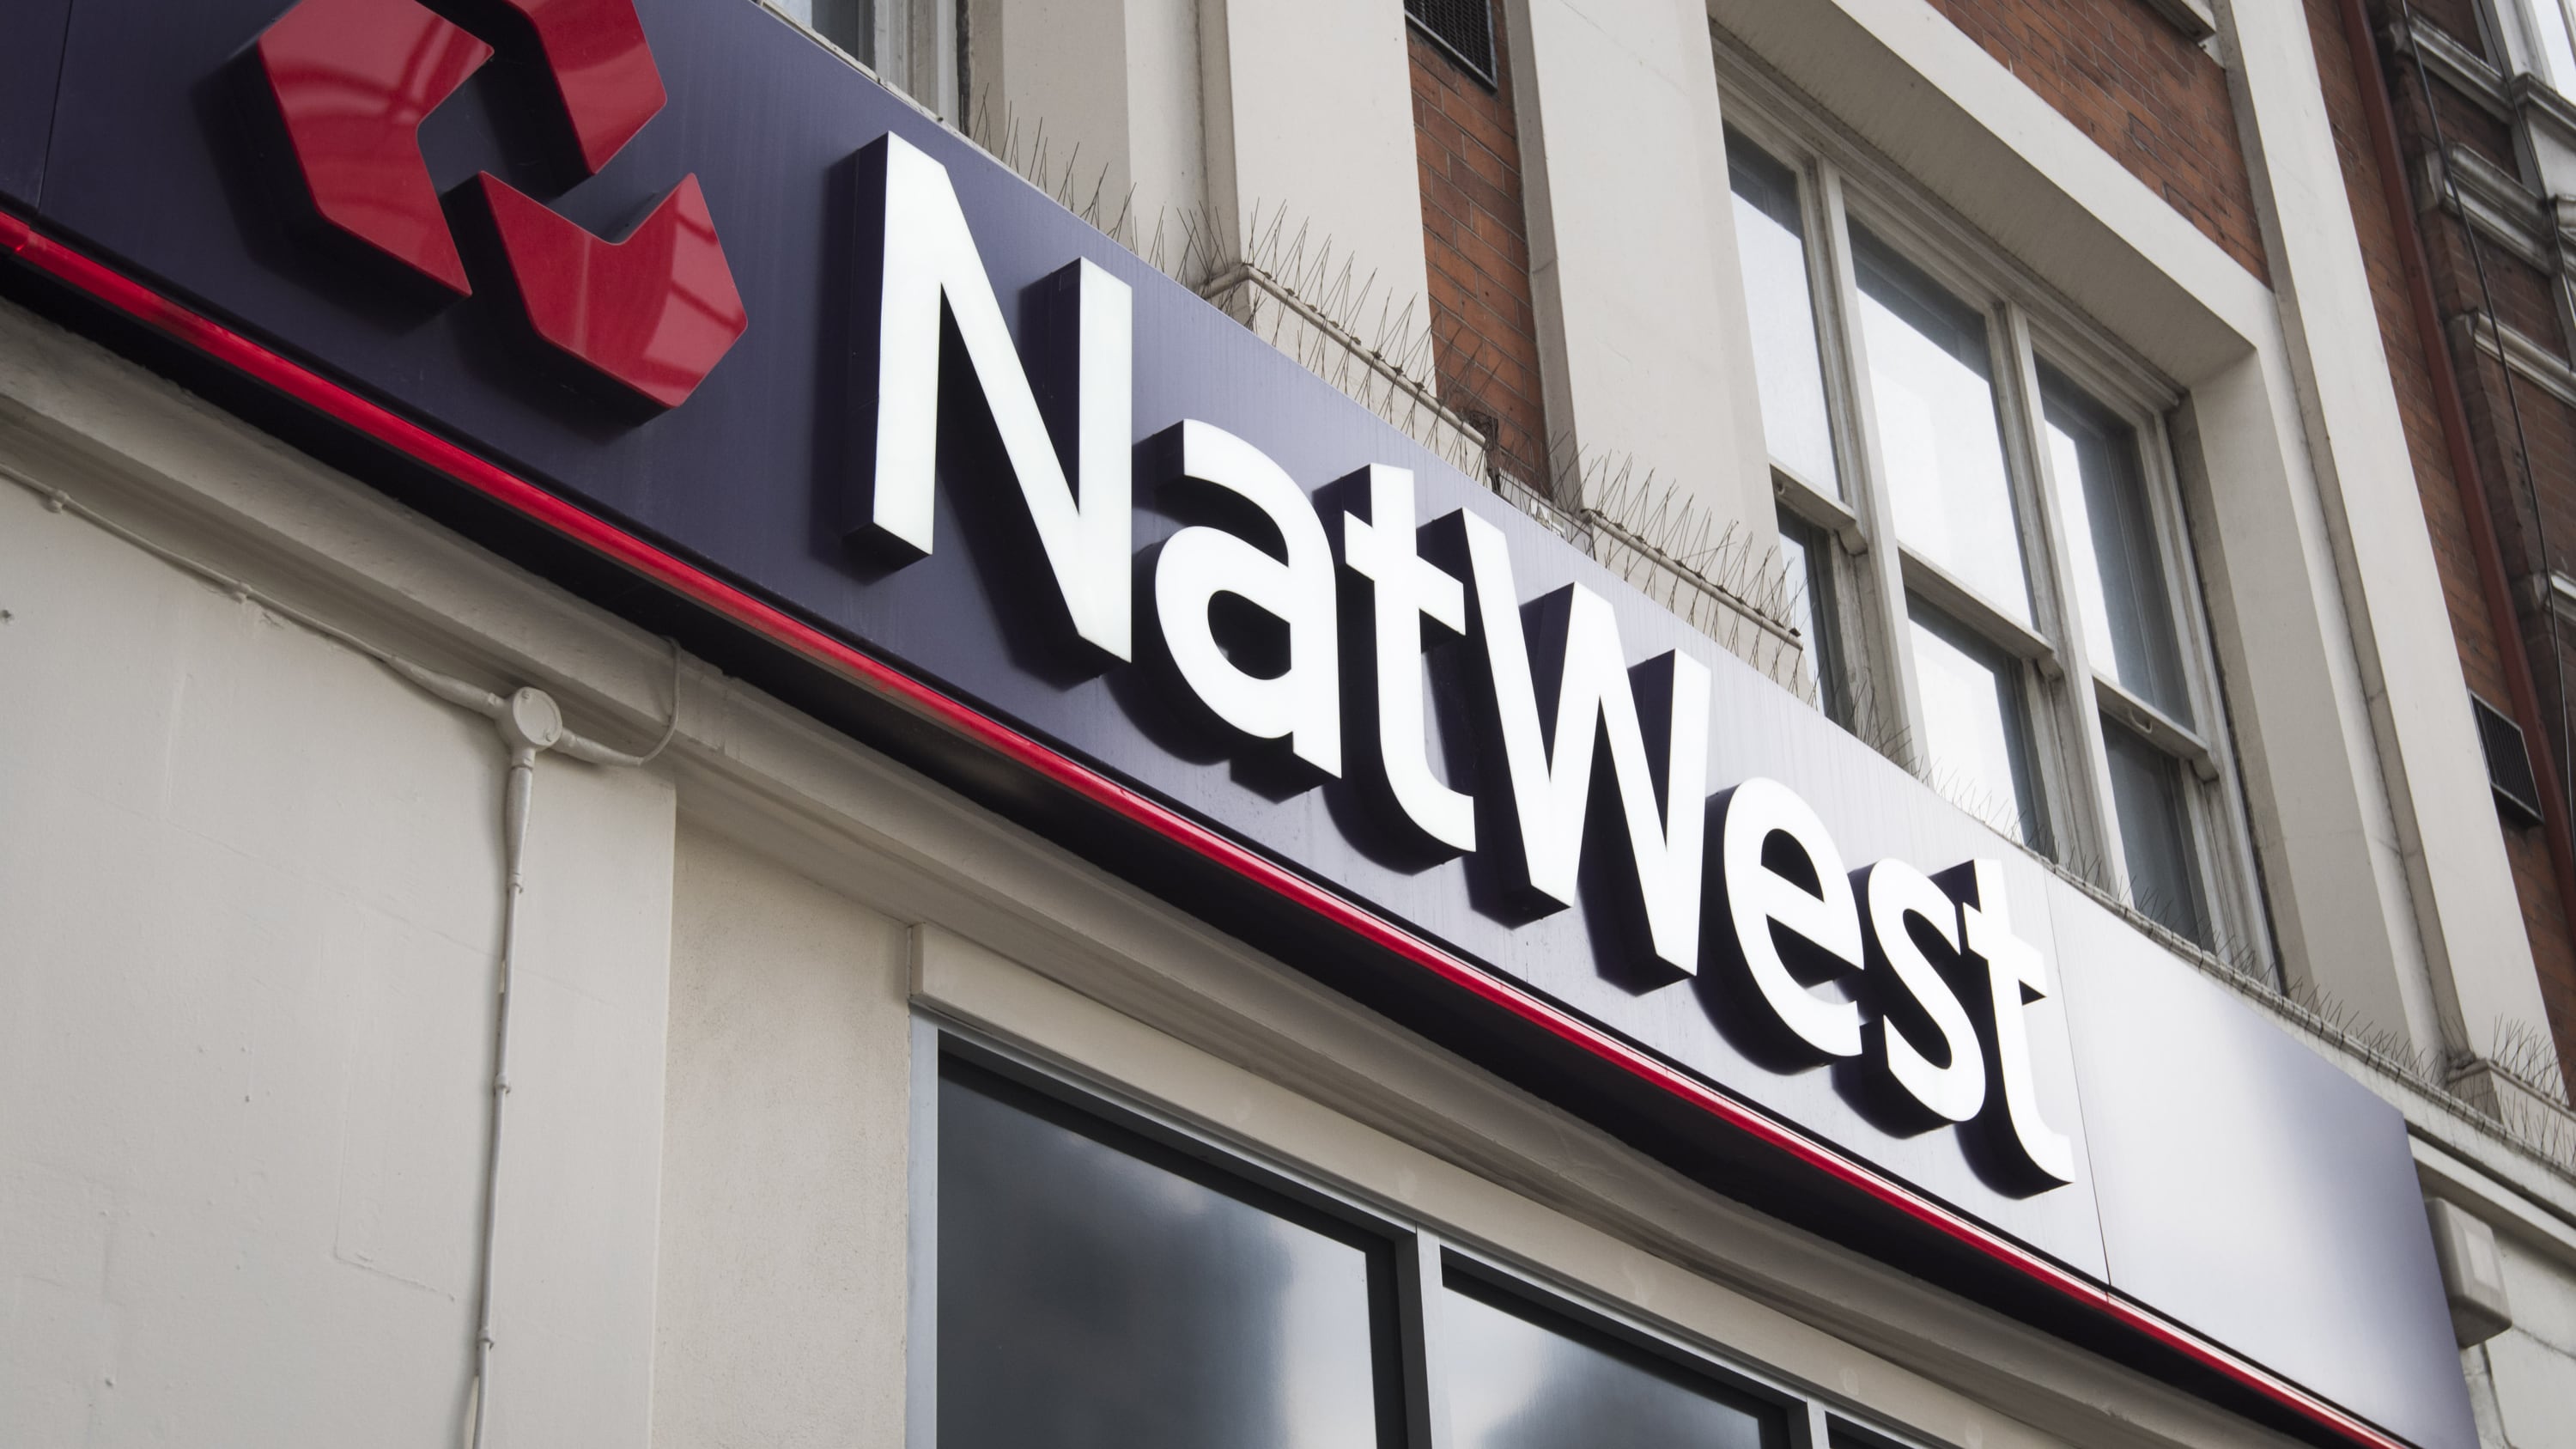 The Treasury has been selling down its stake in NatWest in recent years